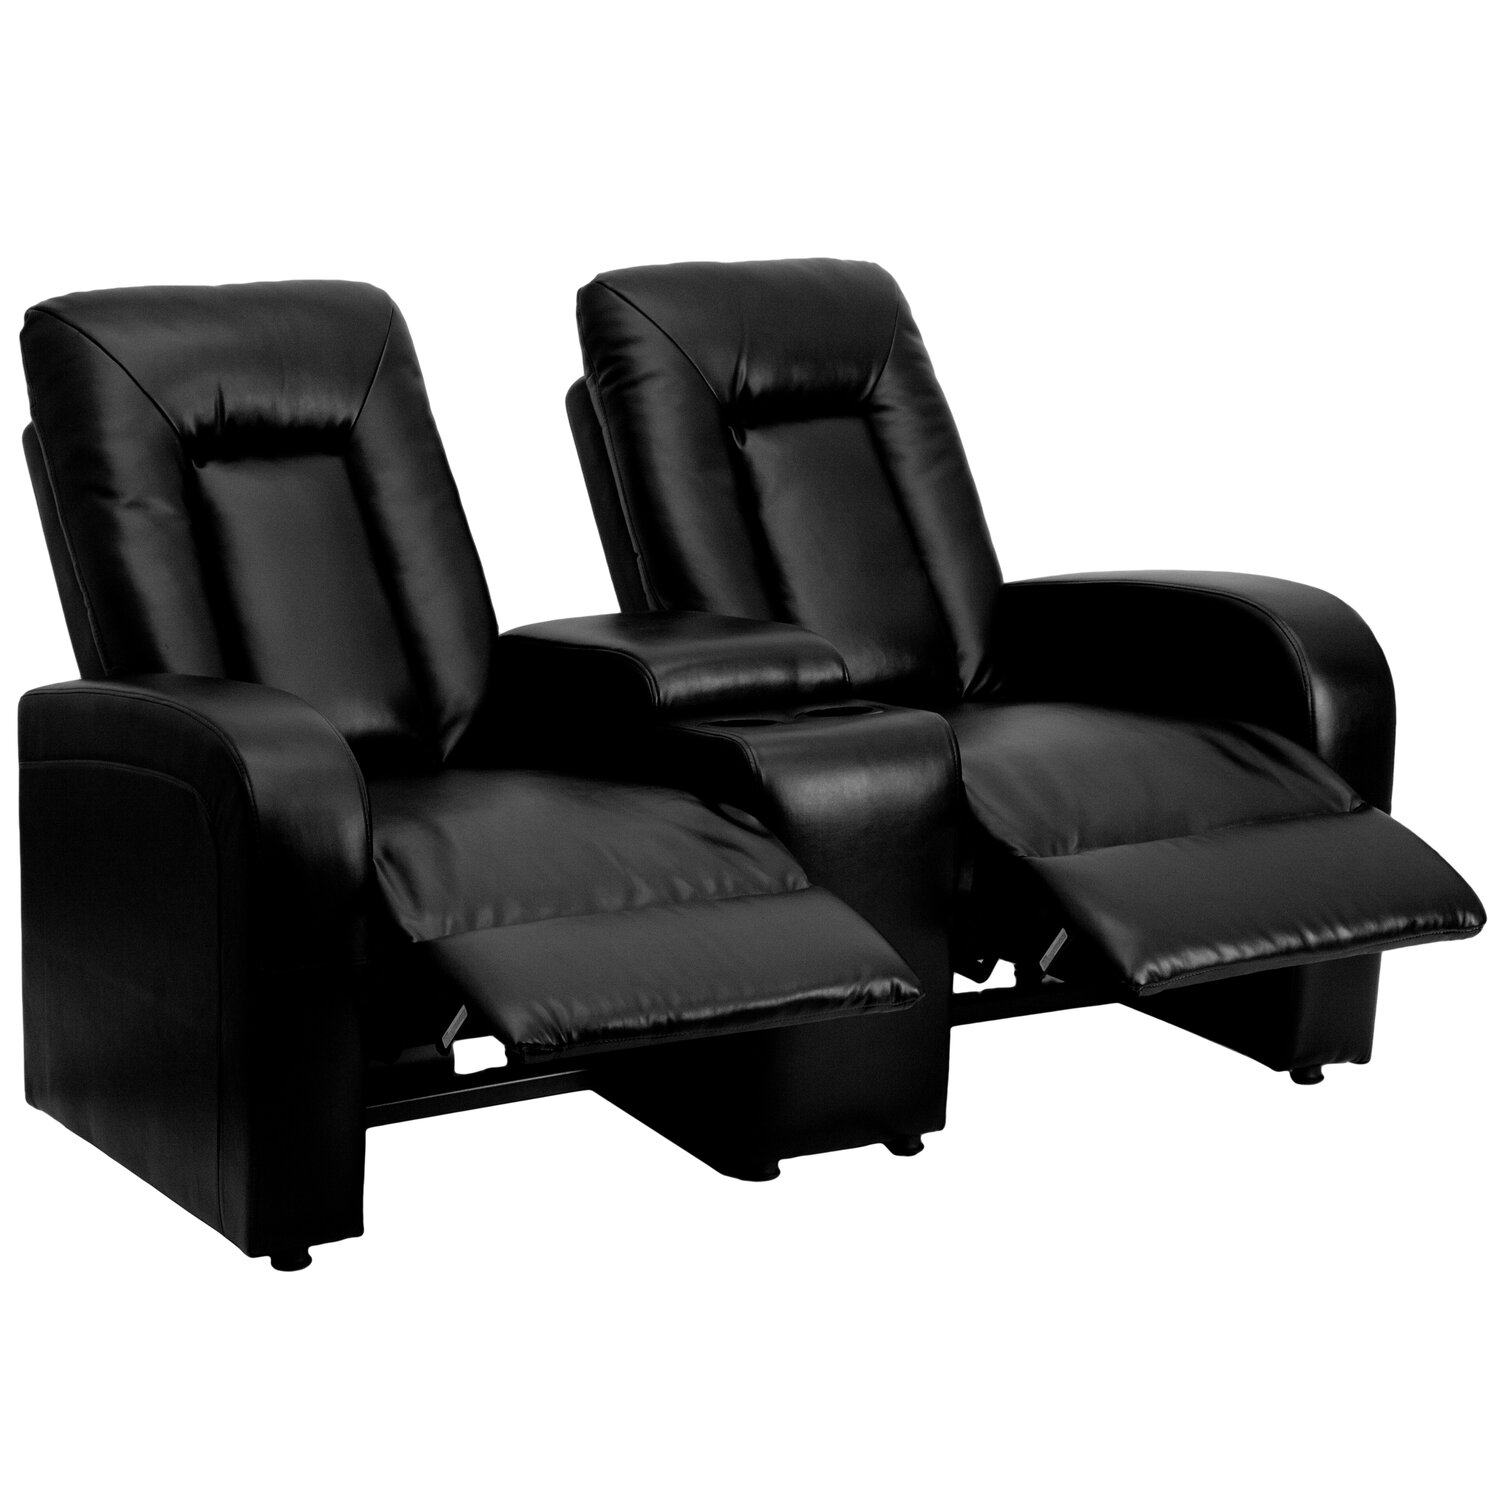 Home theater recliner chairs Abu Dhabi